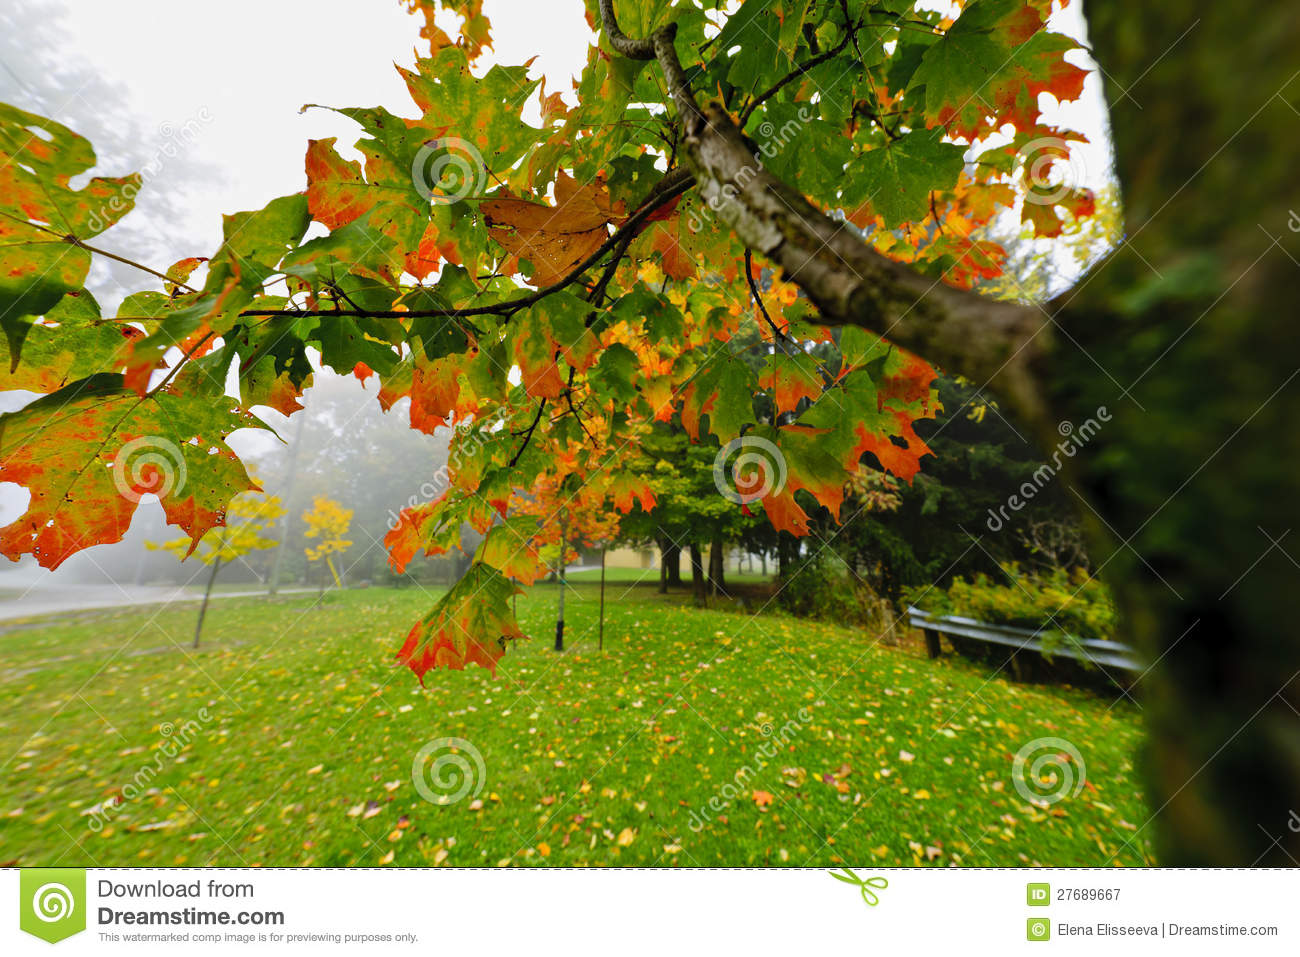 Fall Maple Tree In Foggy Park Royalty Free Stock Photography   Image